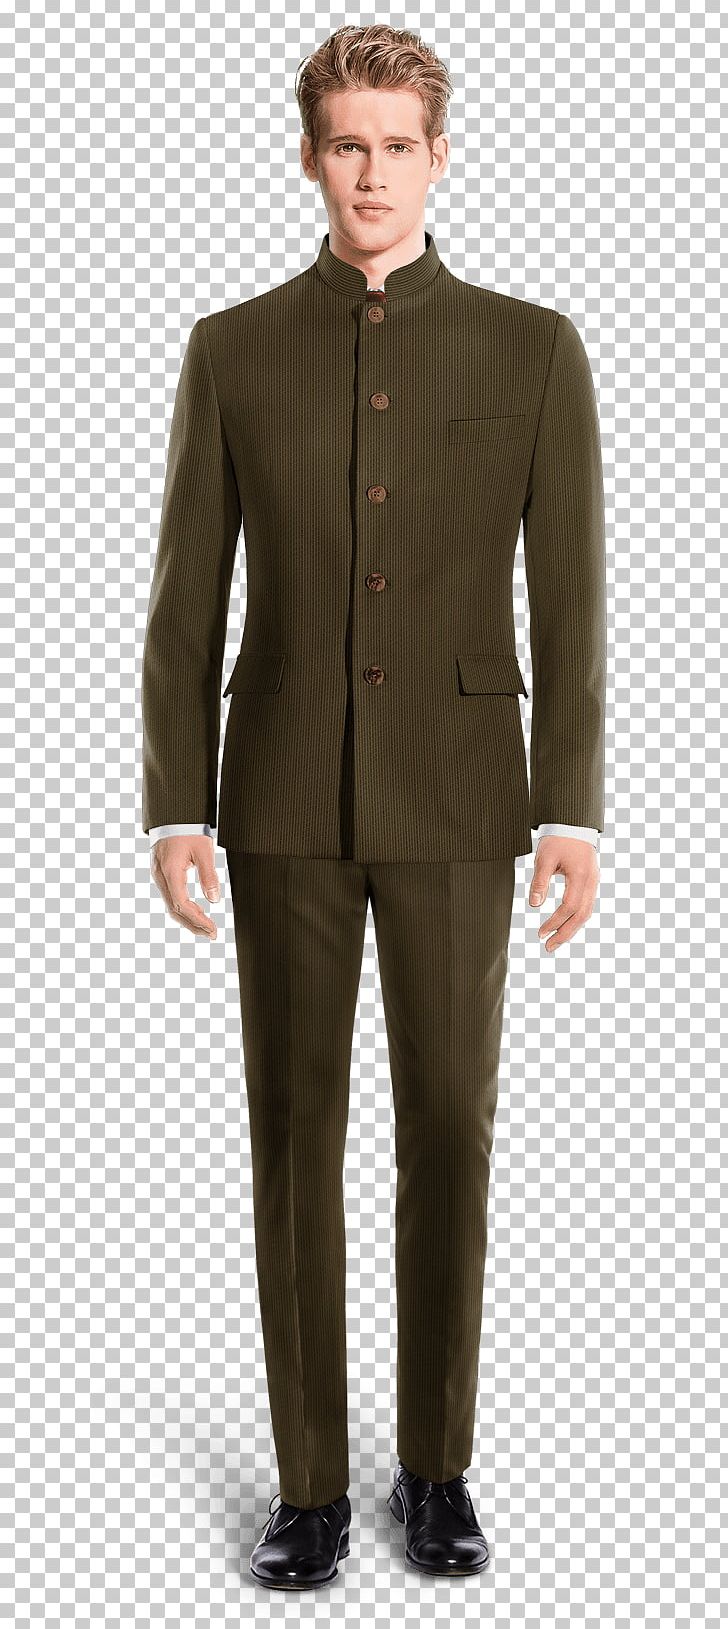 Suit Tweed Double-breasted Wool Pants PNG, Clipart, Blazer, Clothing, Coat, Corduroy, Doublebreasted Free PNG Download